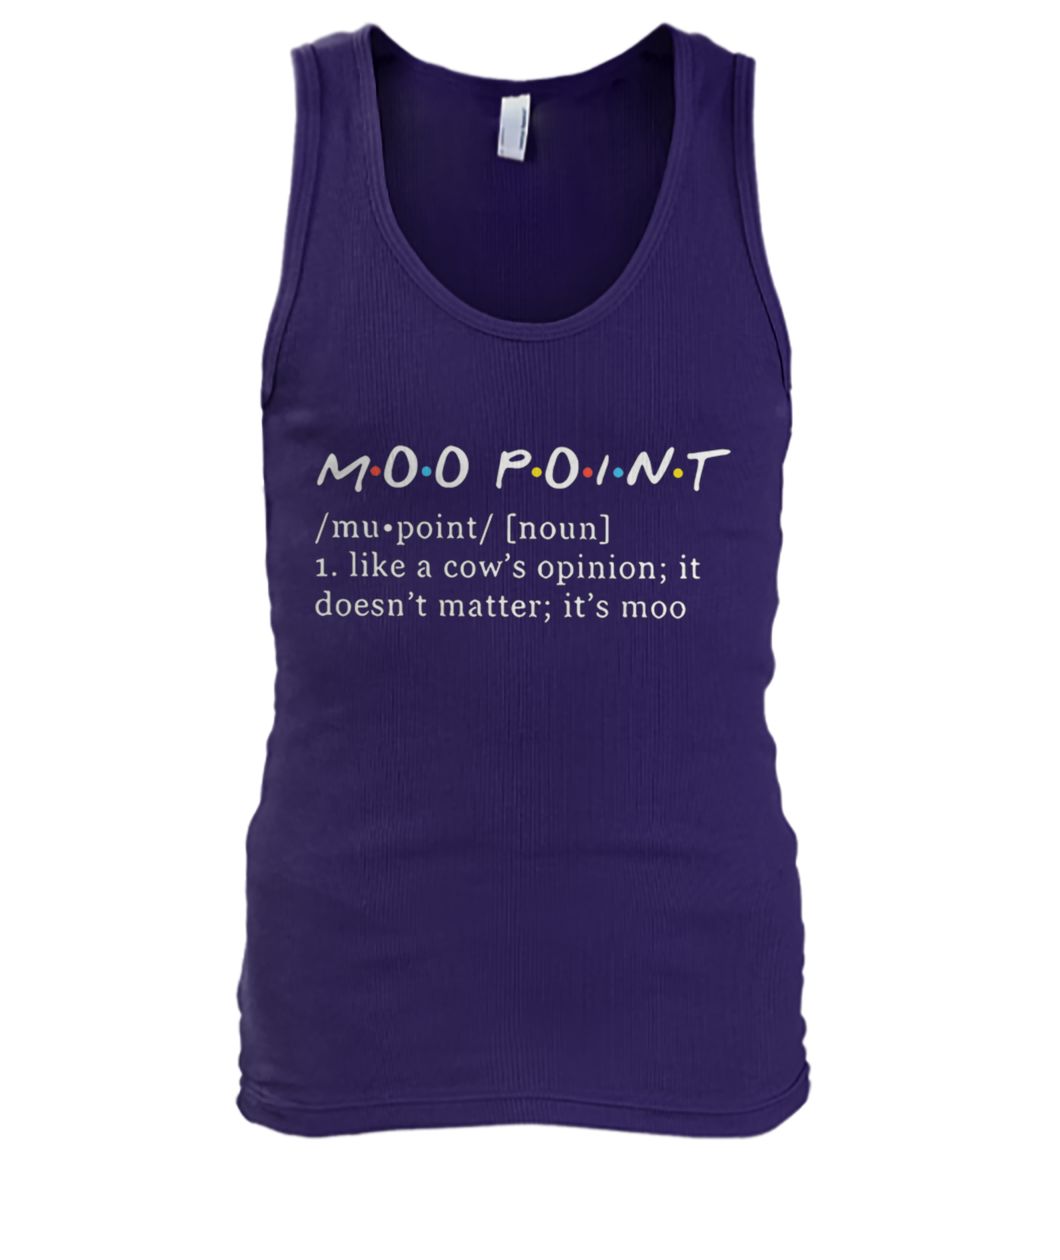 Moo point definition meaning like a cow’s opinion it doesn’t matter it’s moo men's tank top